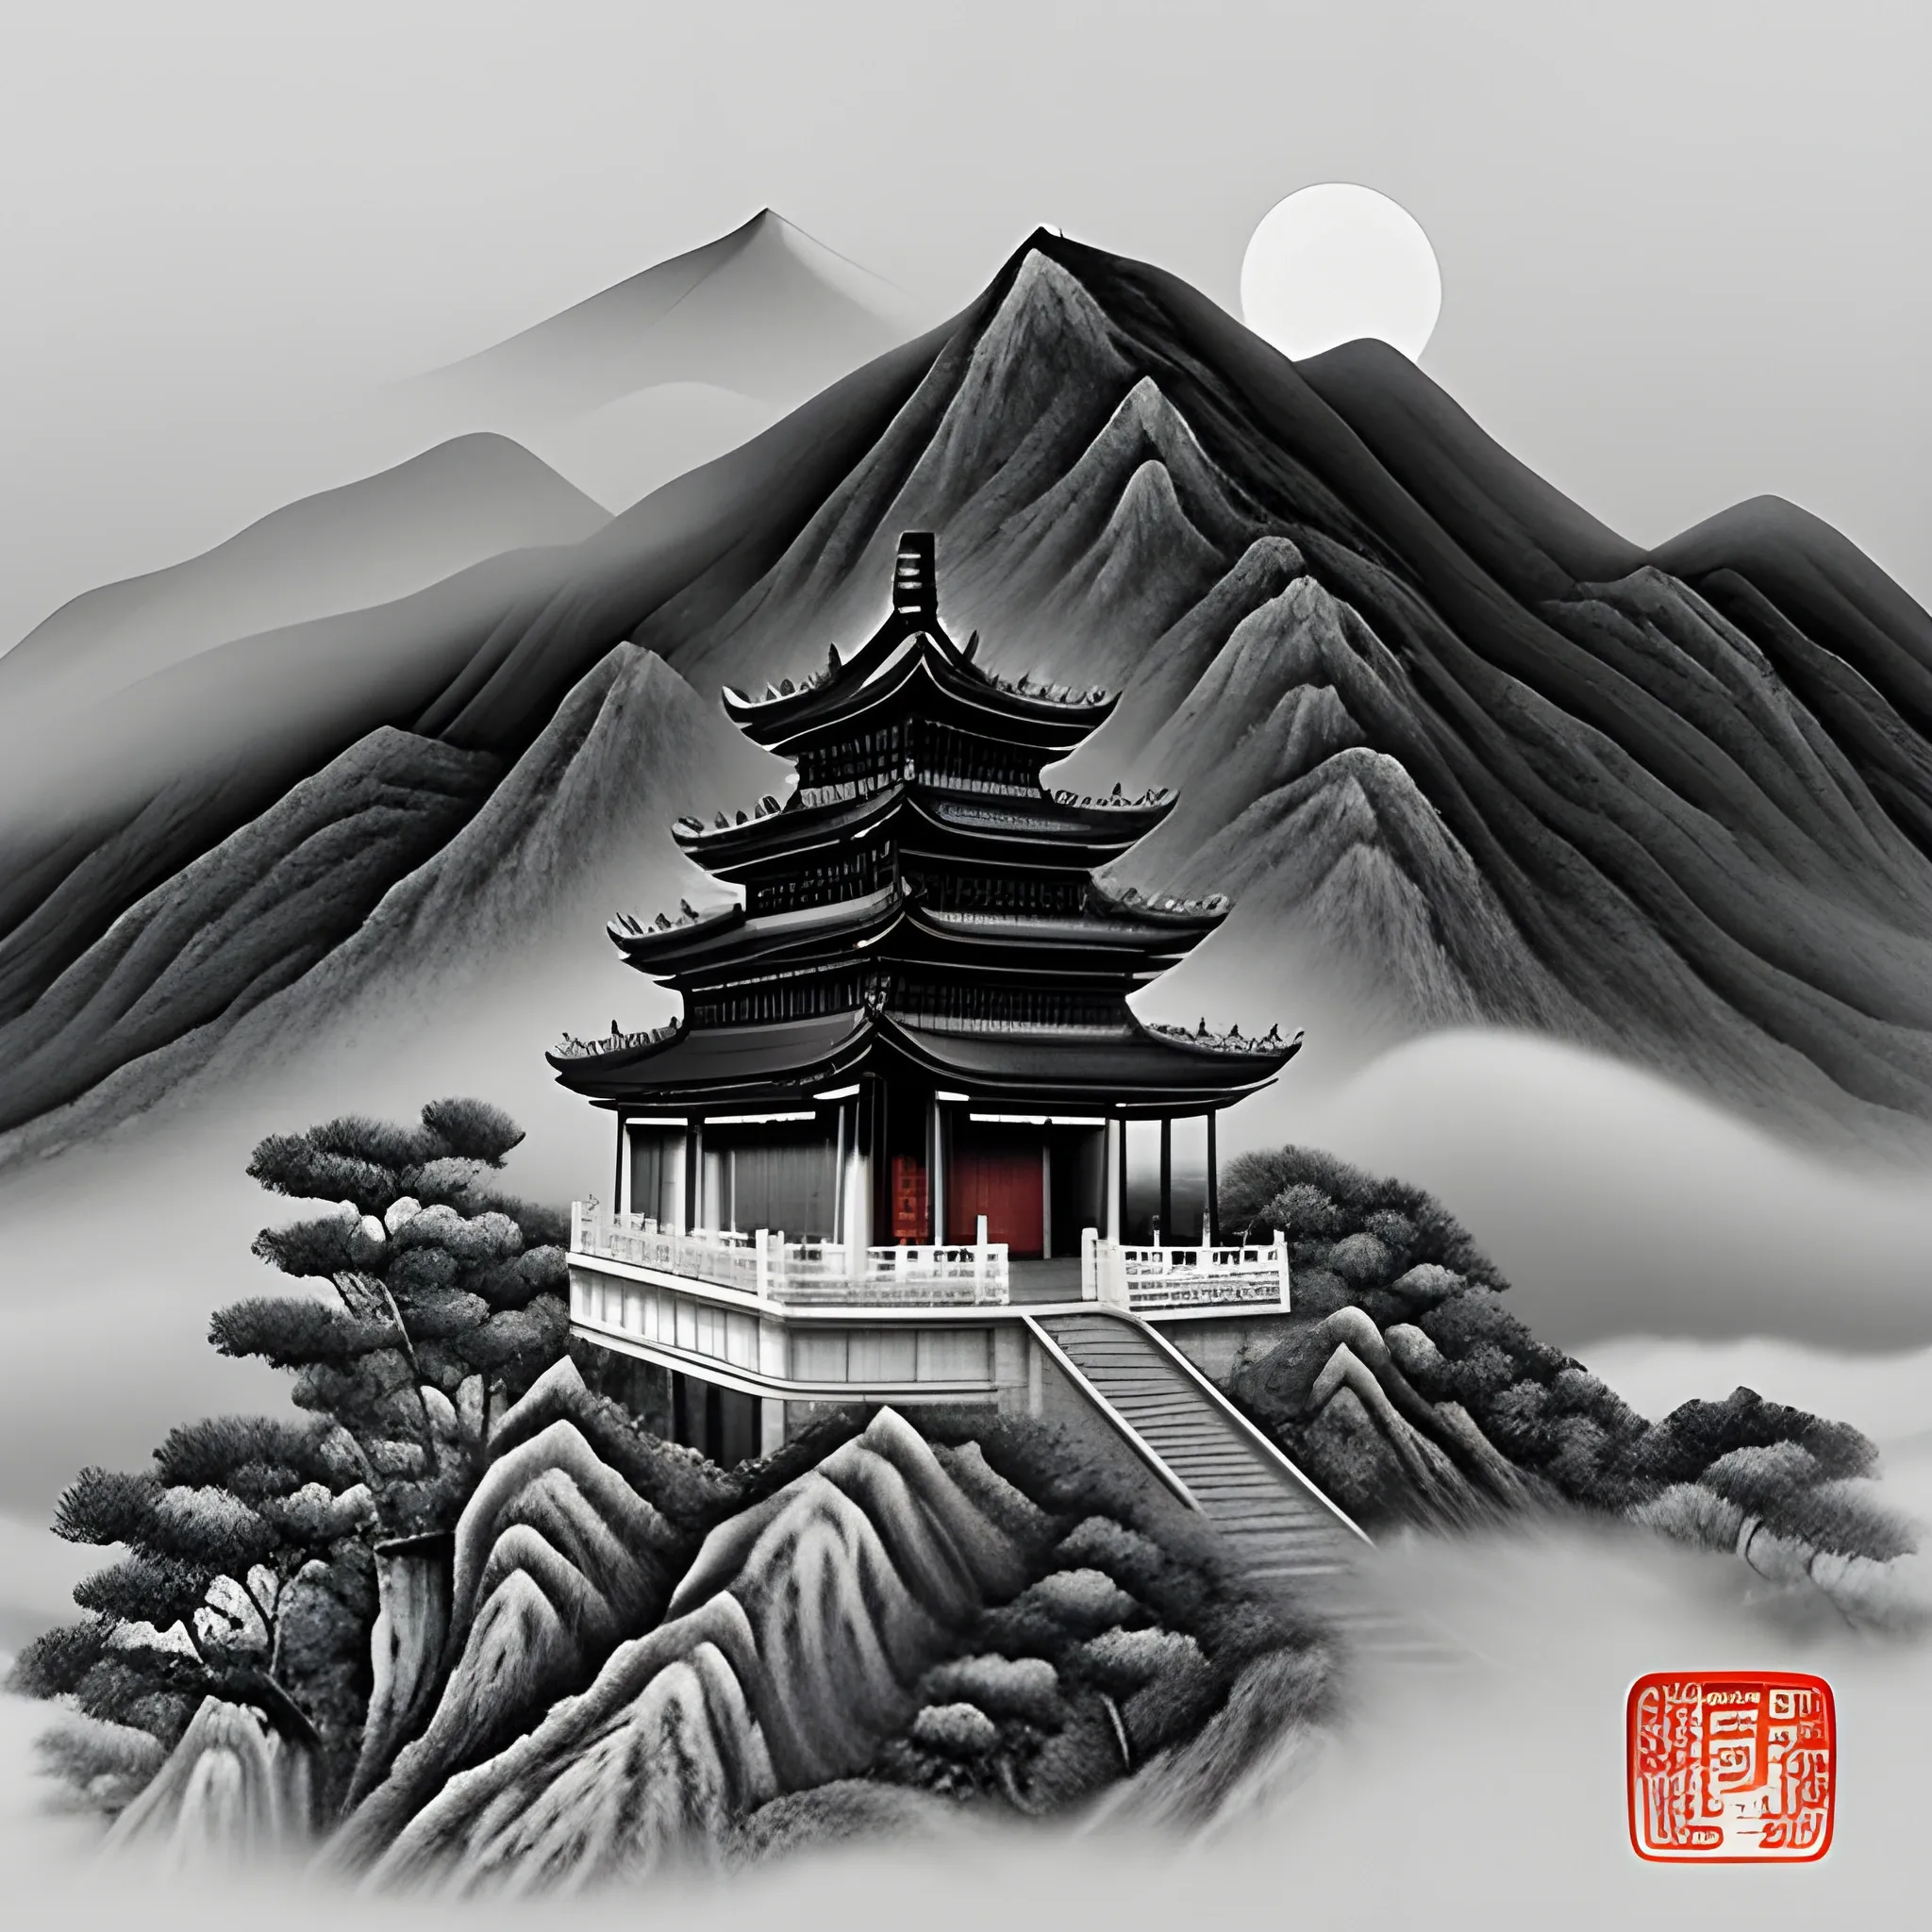 Chinese mountain scenery with small pagoda hiding in the moutain, moon phase top right corner,  fog, traditional Chinese brush style, ultra-high details, ultra-high definition in black and white